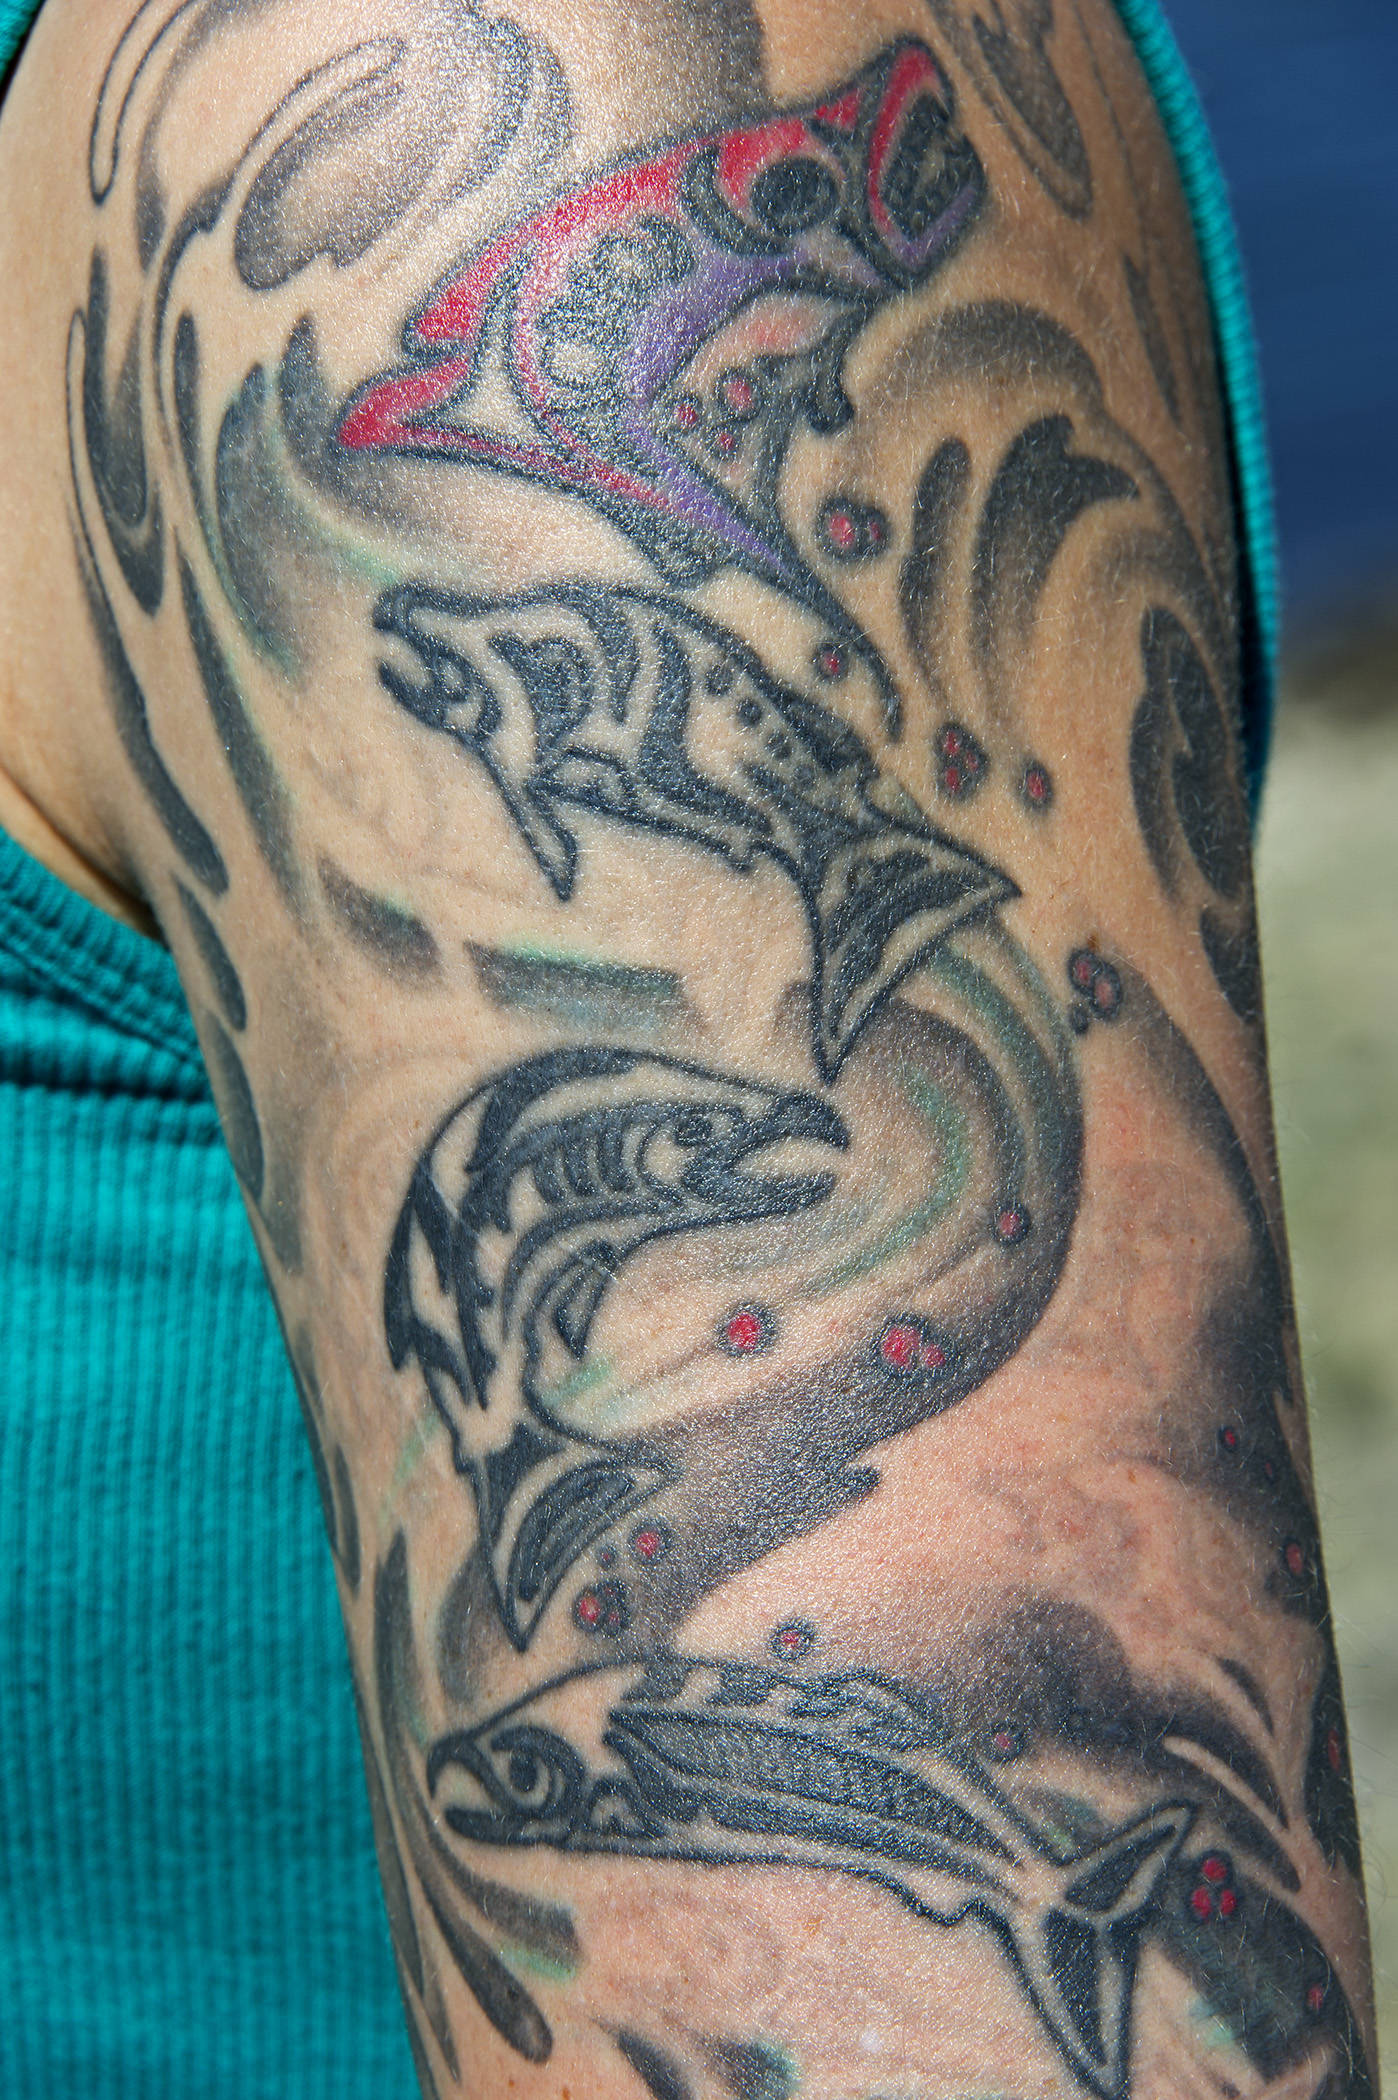 A salmon tattoo featured in Amy Gulick’s book, “The Salmon Way: An Alaska State of Mind.” (Courtesy Photo | Amy Gulick)